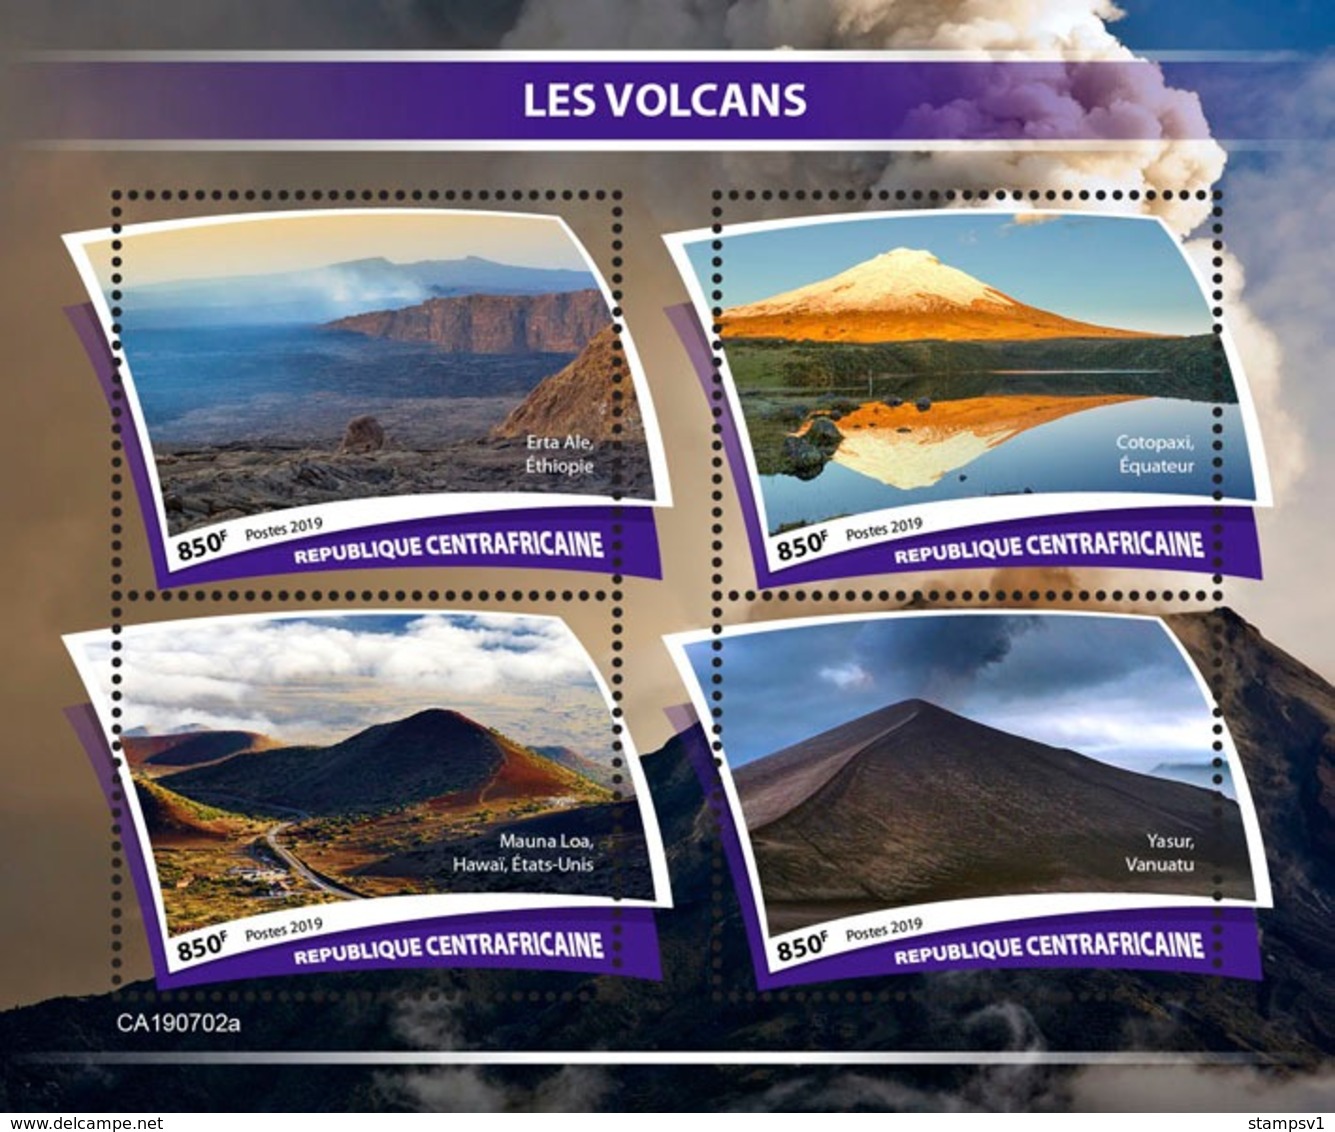 Central Africa. 2019 Volcanoes. (0702a)  OFFICIAL ISSUE - Volcanos